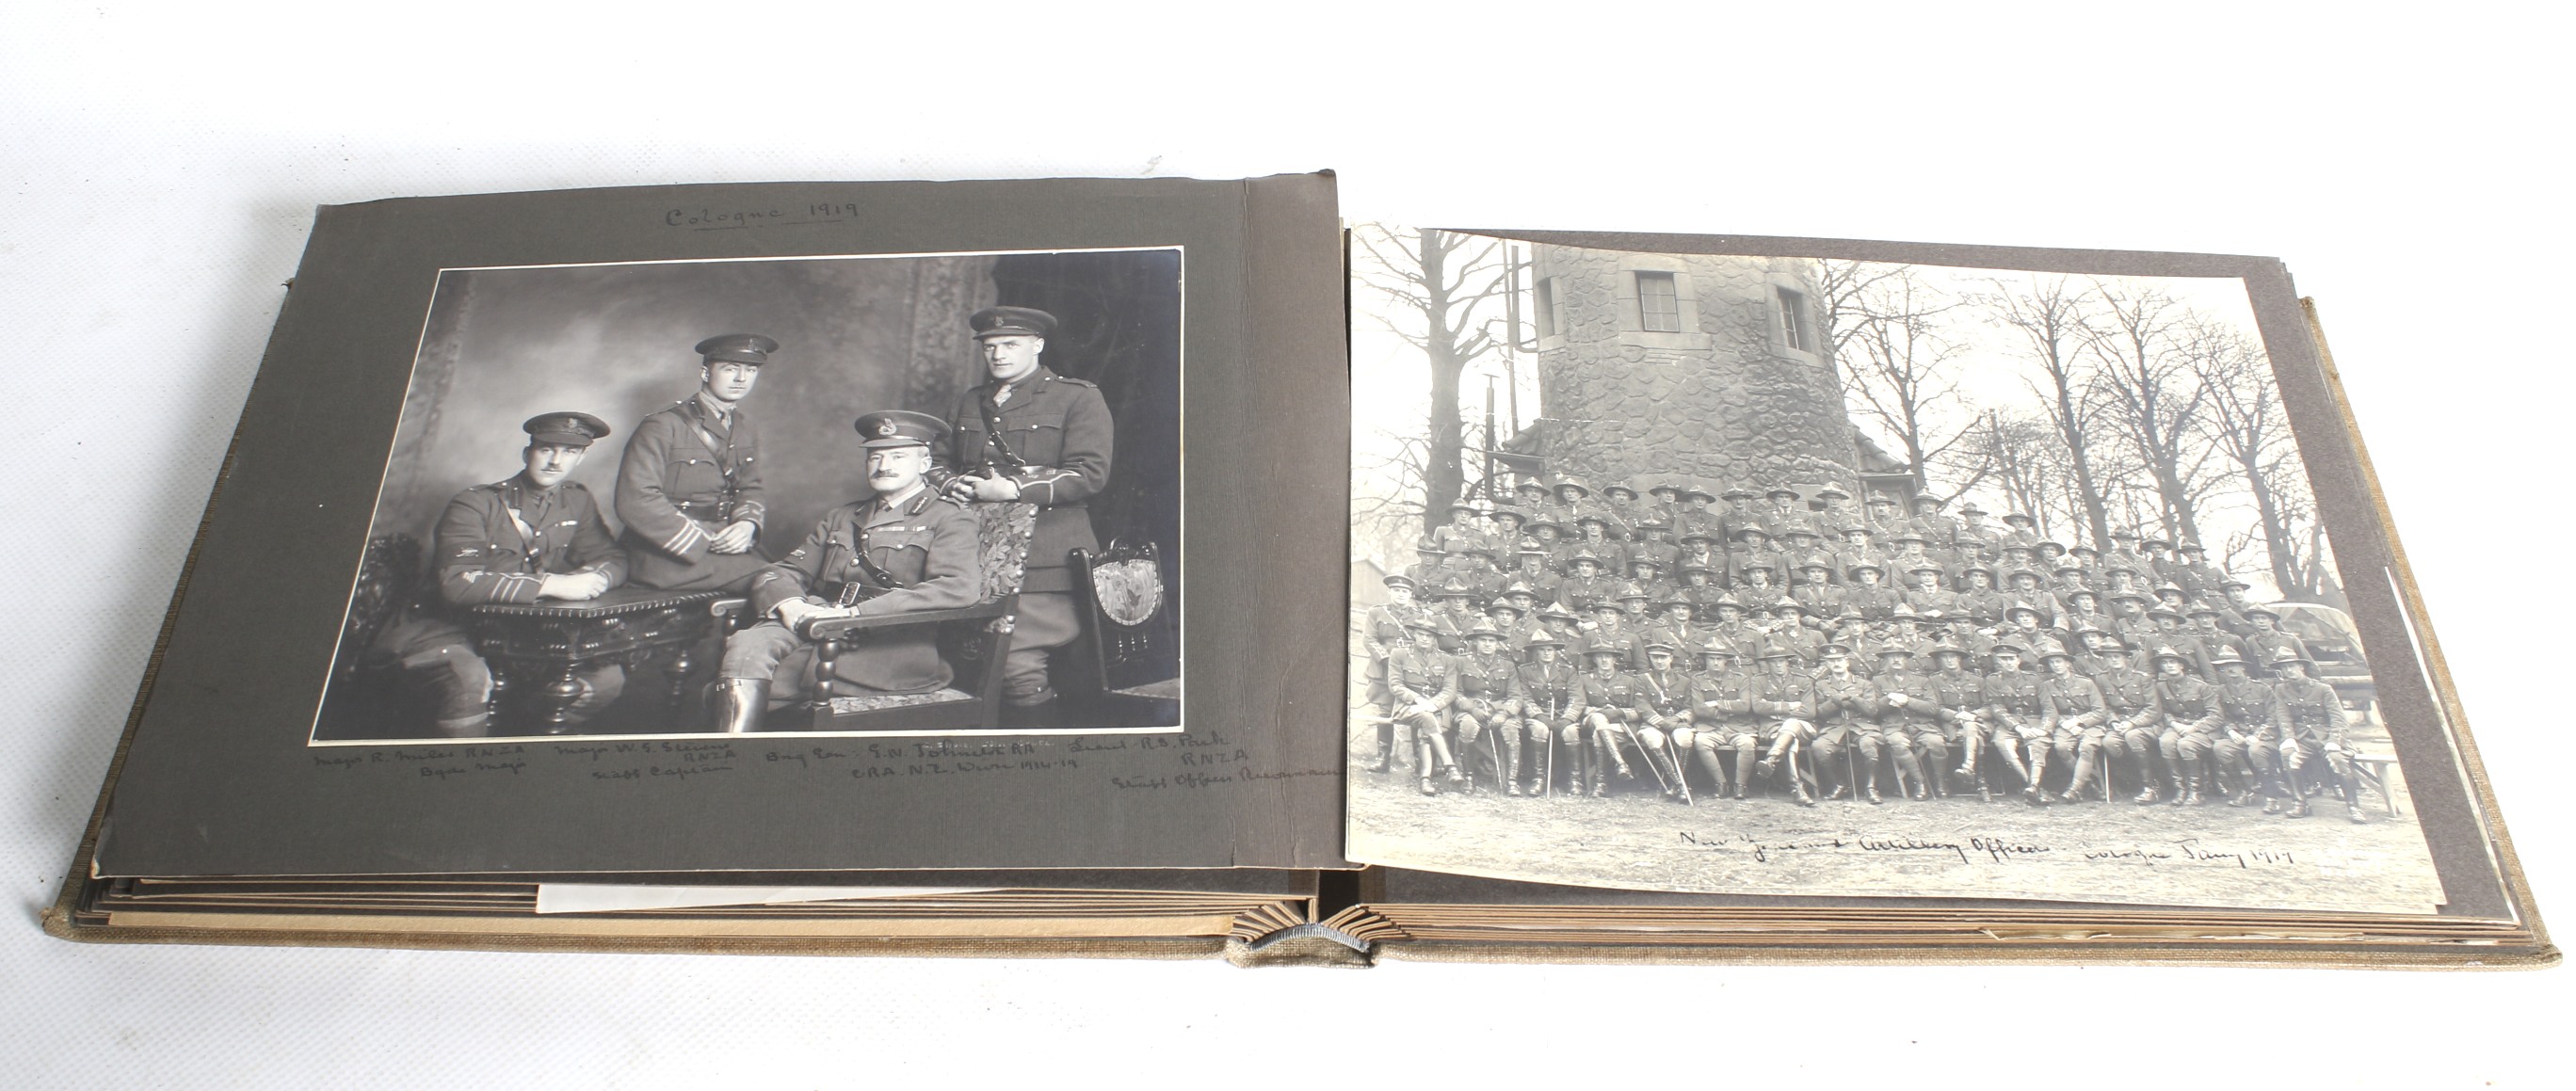 Circa 1914-18 beige canvas album of military photos and postcards. - Image 5 of 7